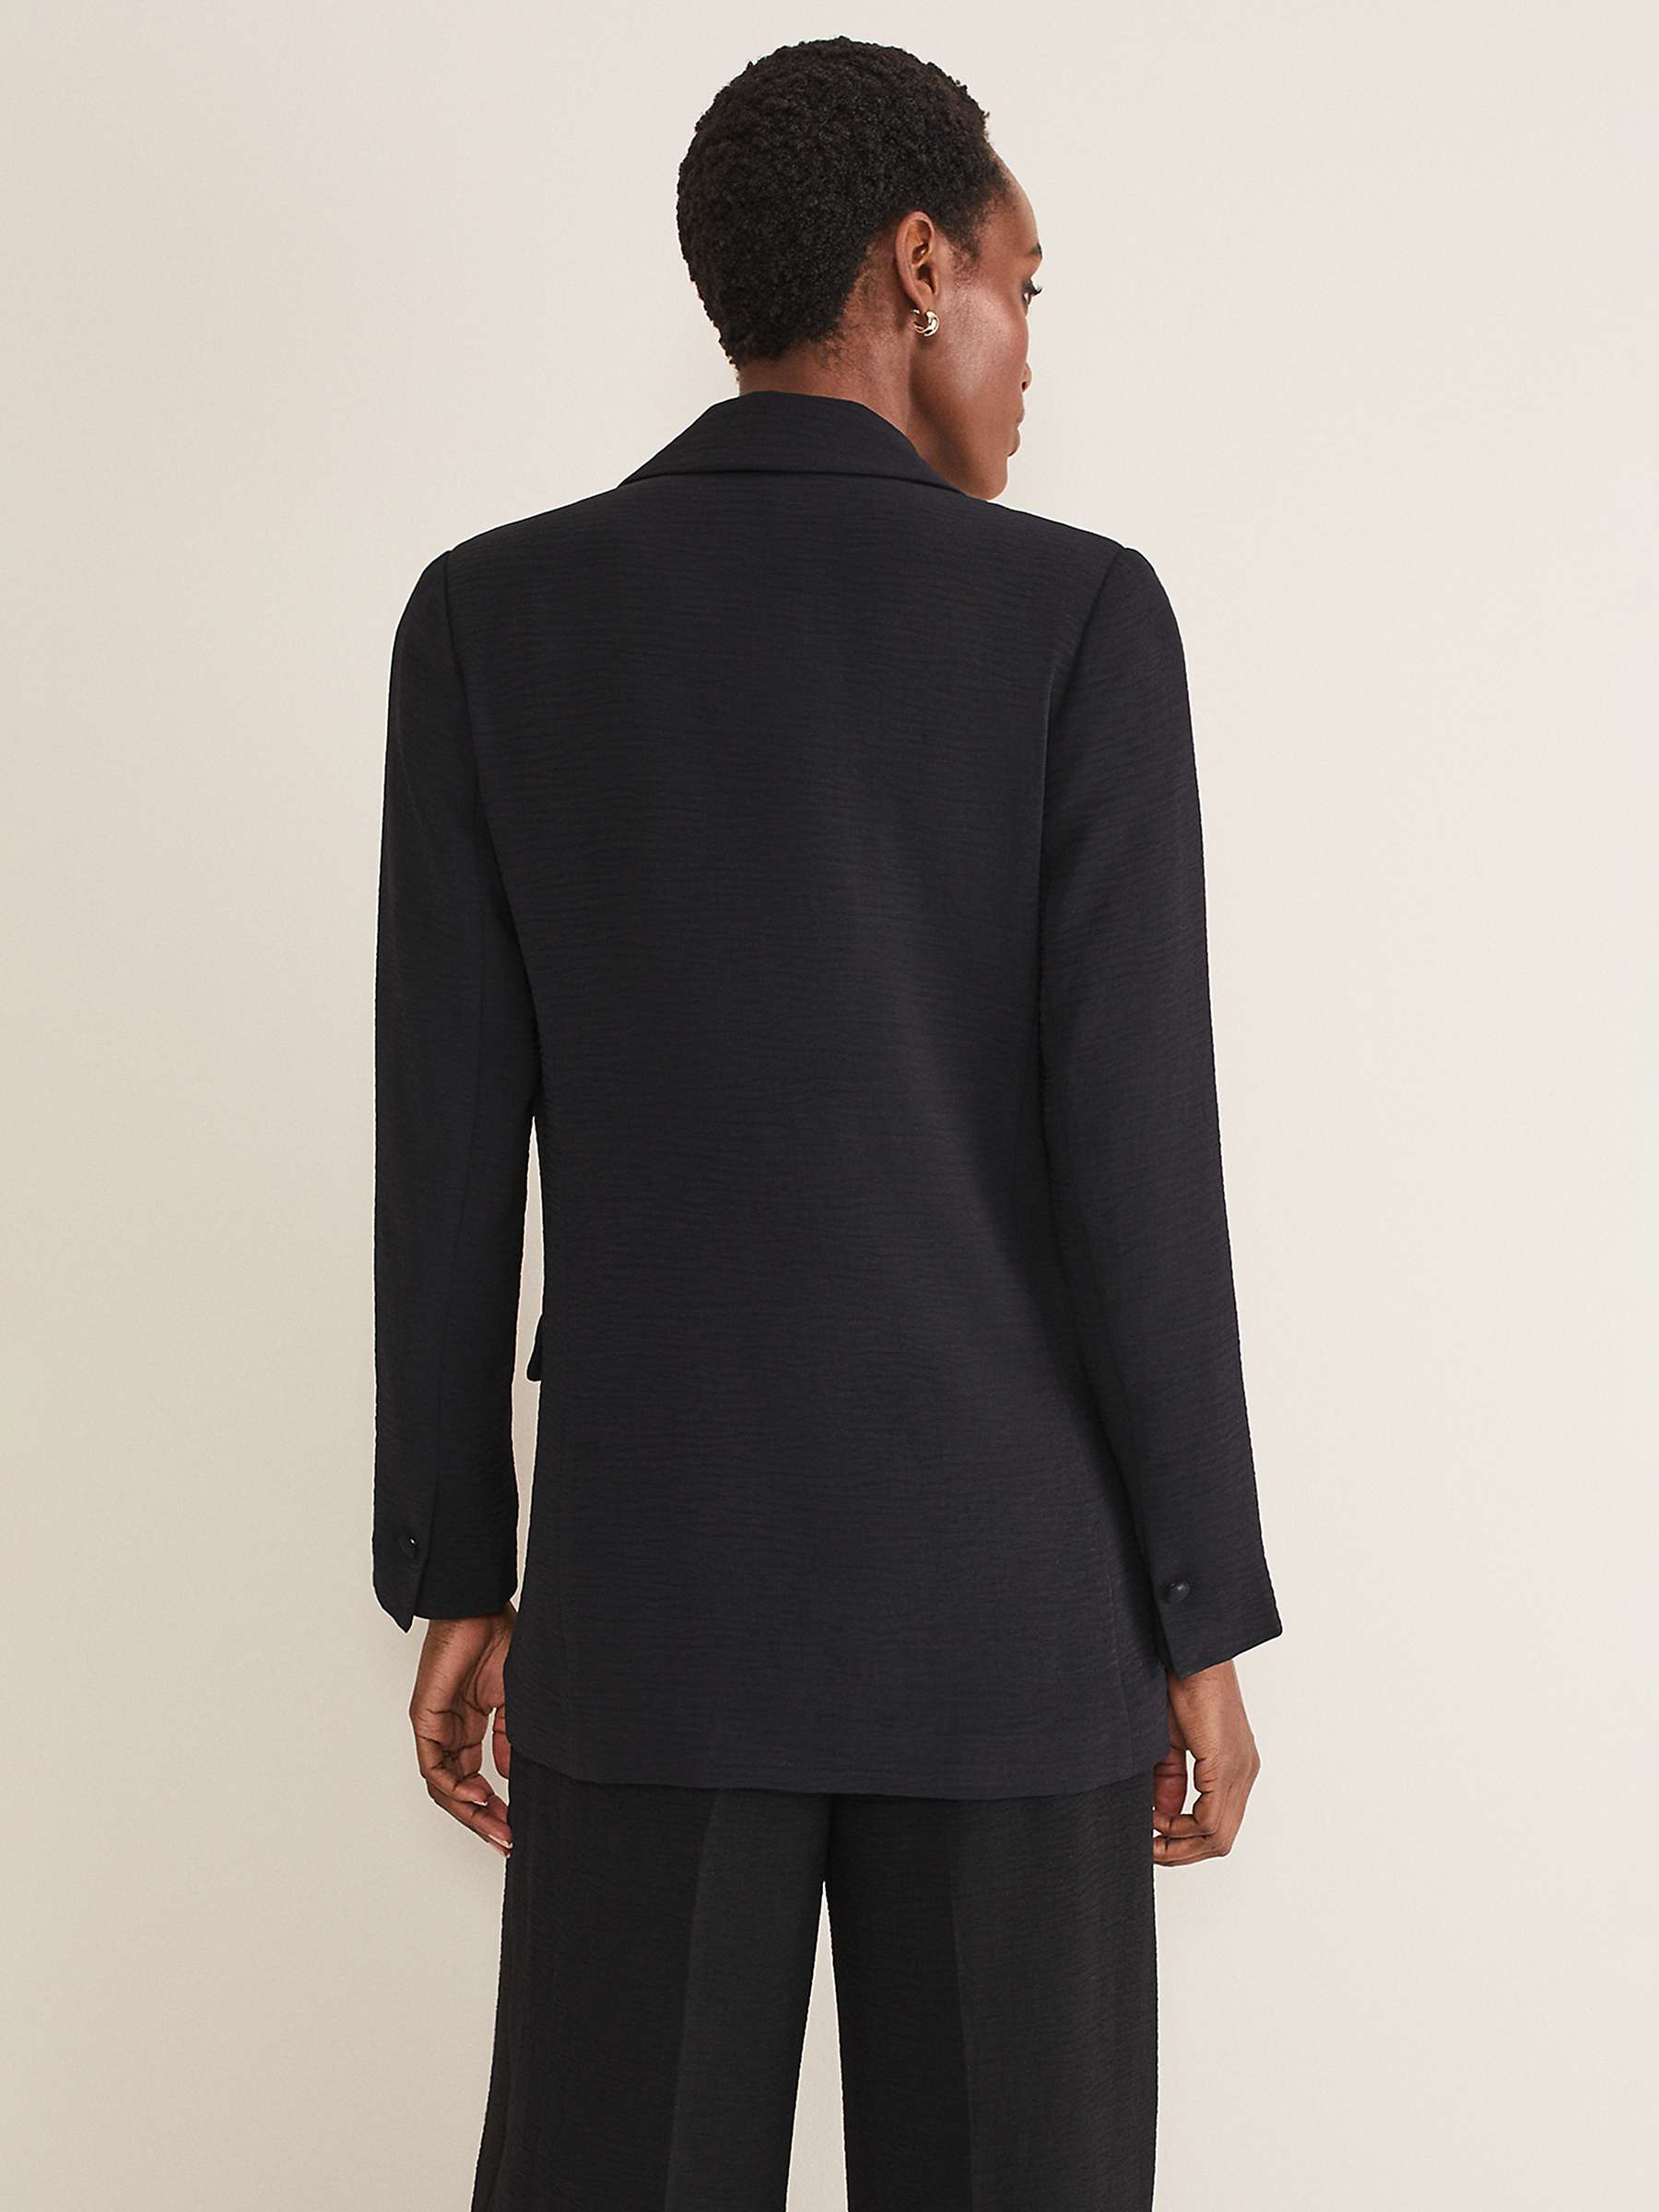 Buy Phase Eight Opal Suit Jacket Online at johnlewis.com